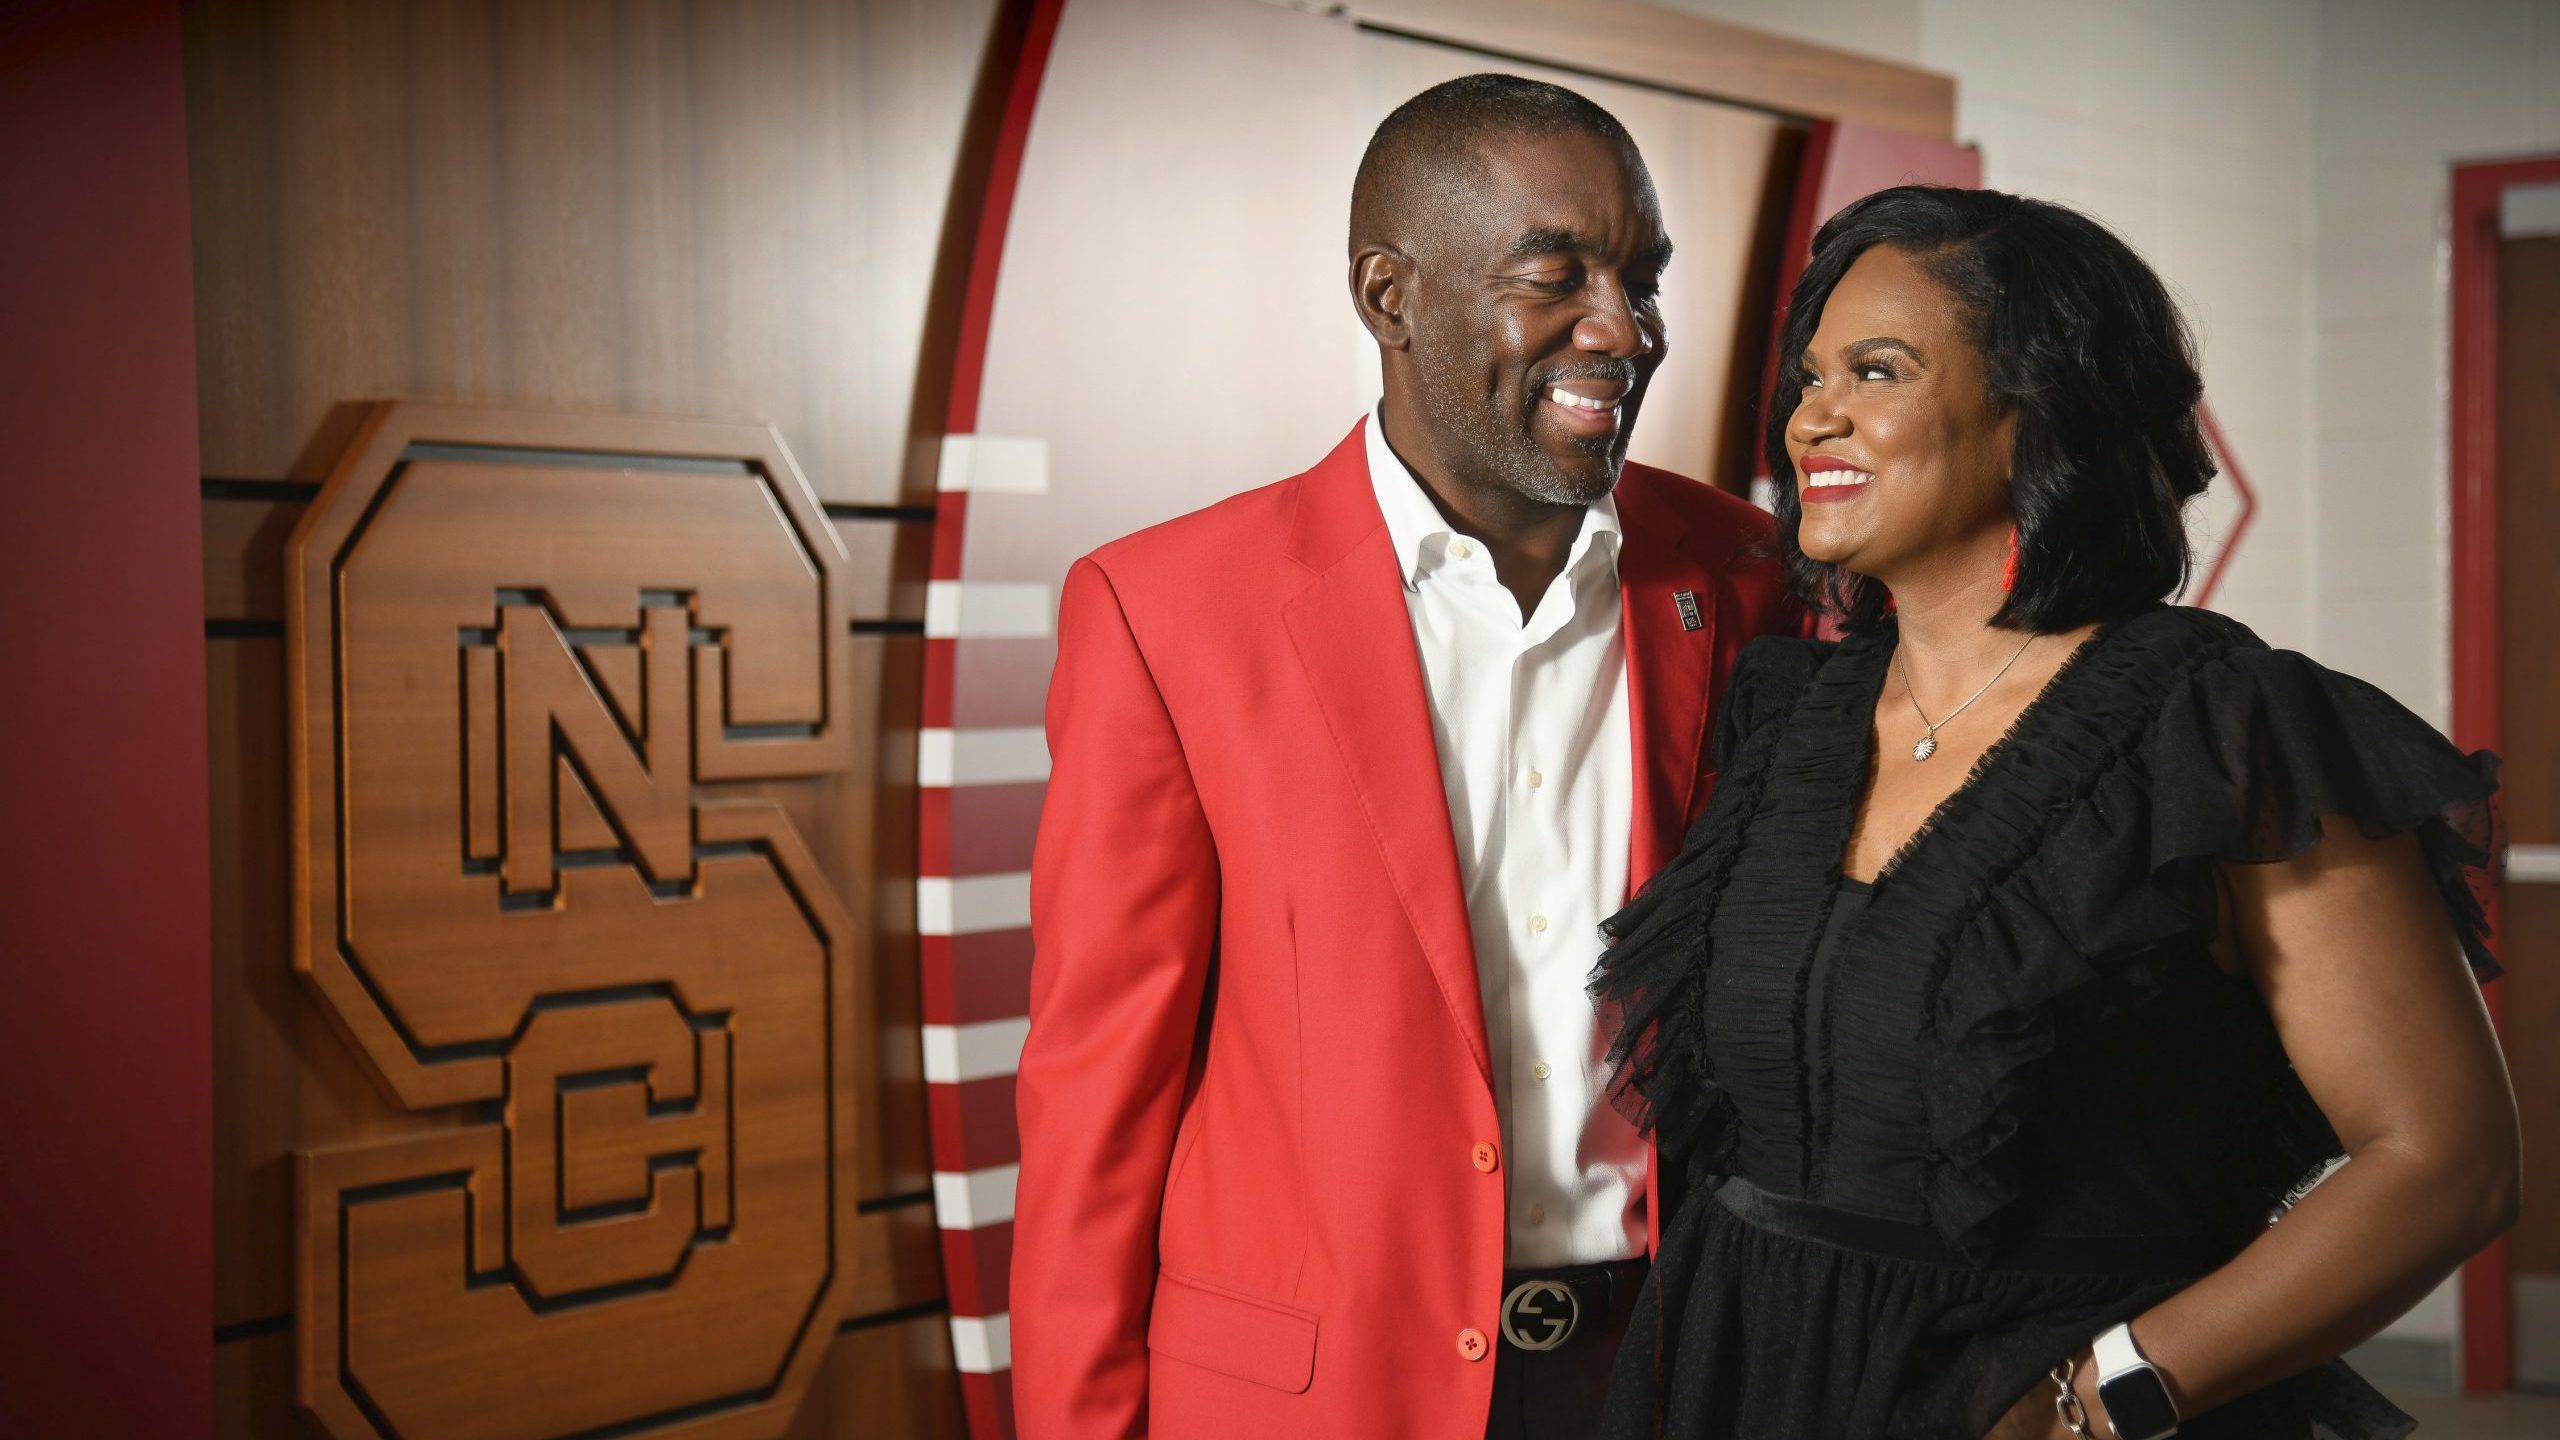 Dewayne and Adama Washington smiling at each other in front of the N.C. State logo.